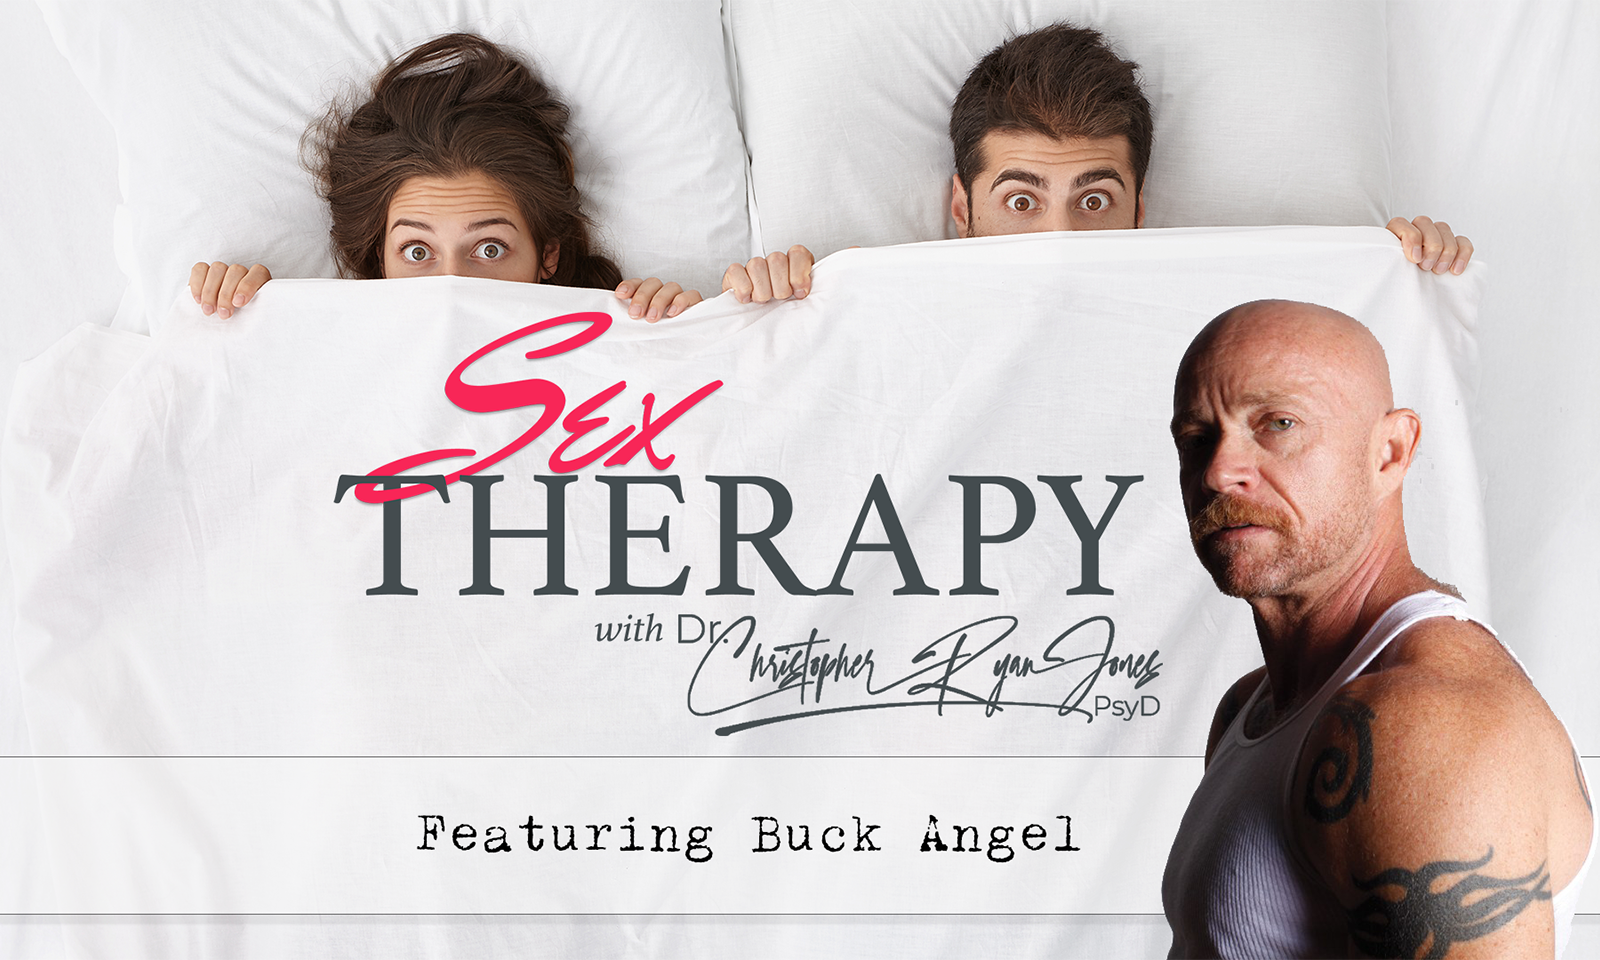 Buck Angel Is Featured Guest on 'Sex Therapy With Dr. Jones'